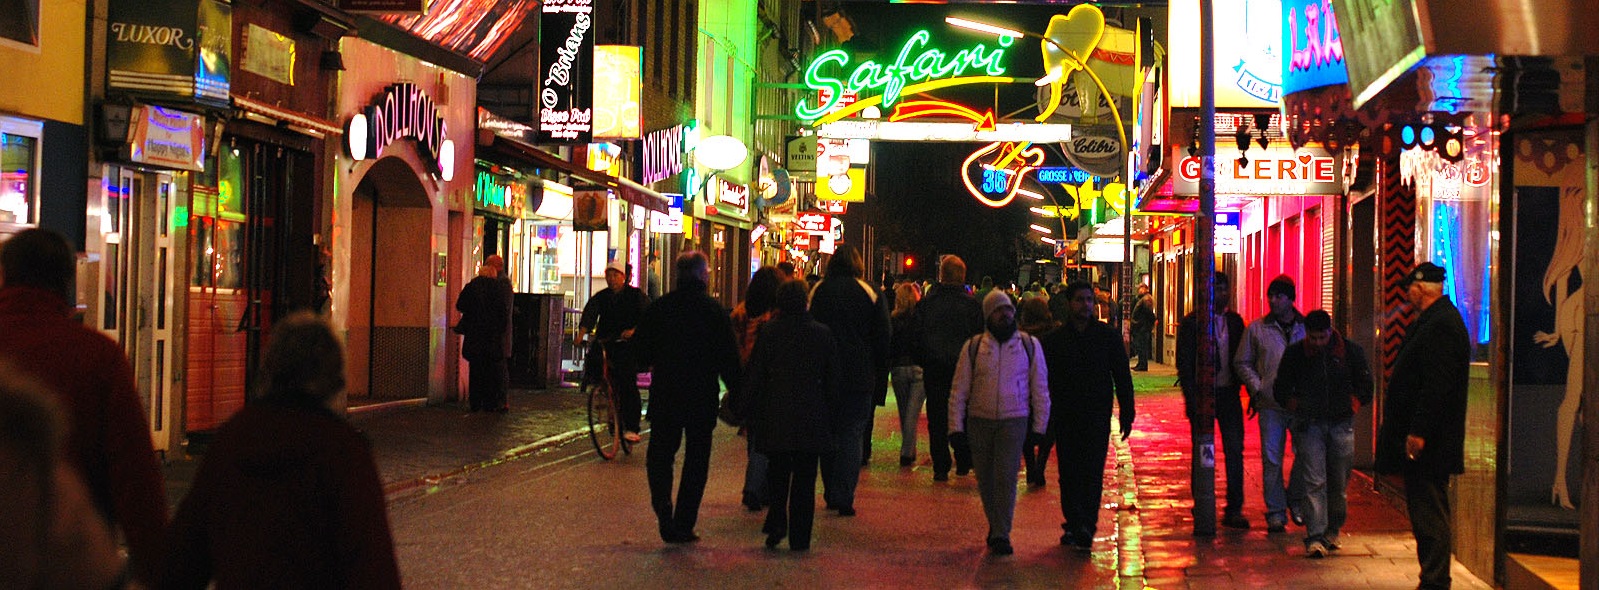 Reeperbahn image for Top Things To Do in Hamburg blog